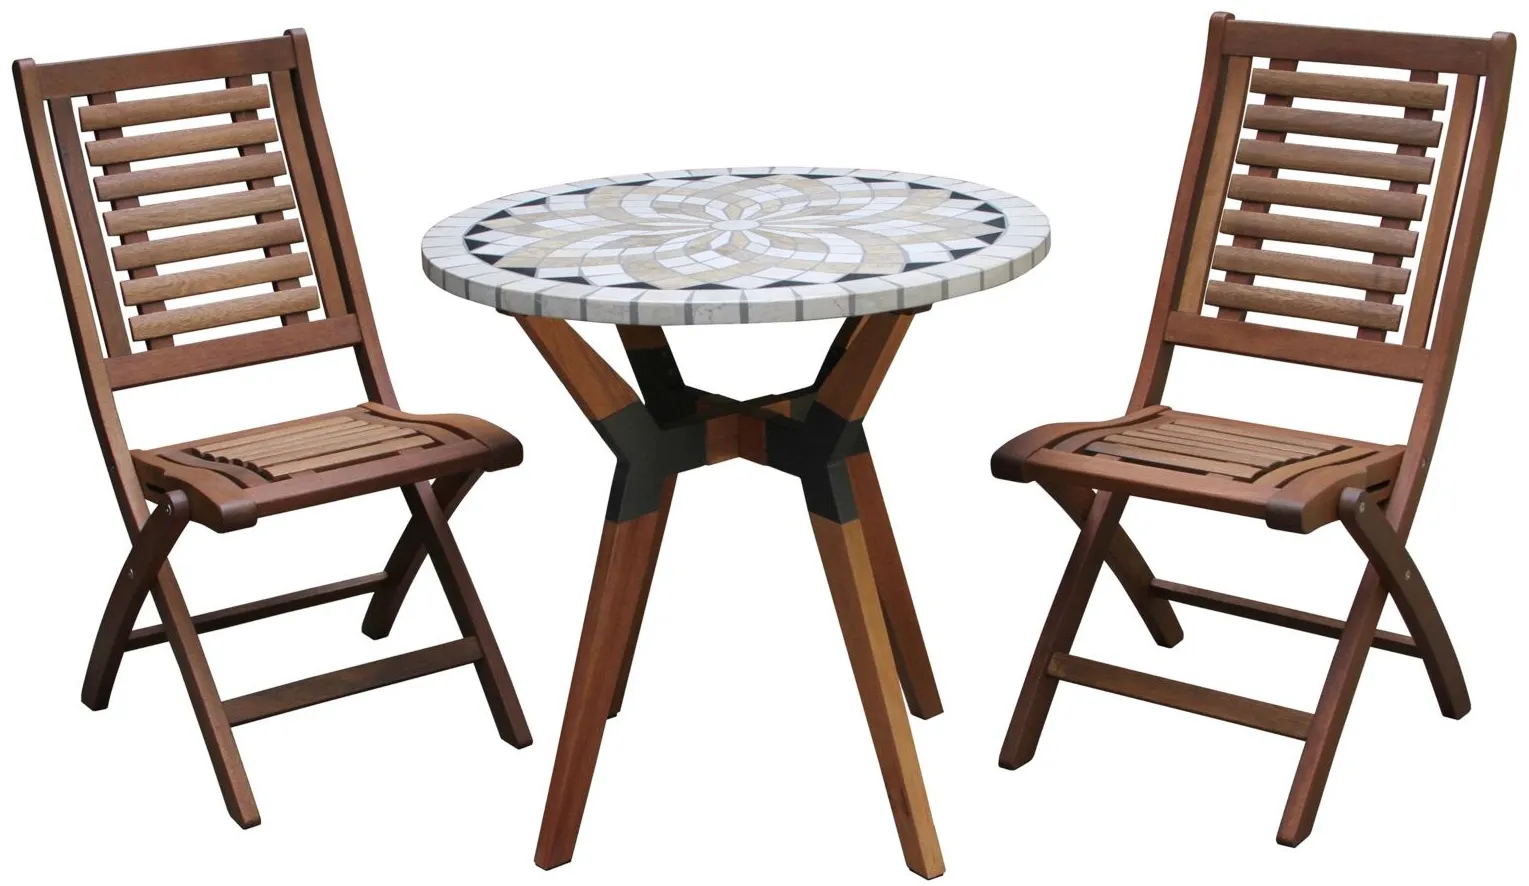 Bauer 3 pc. Bistro Set with Folding Chairs in Multi by Outdoor Interiors